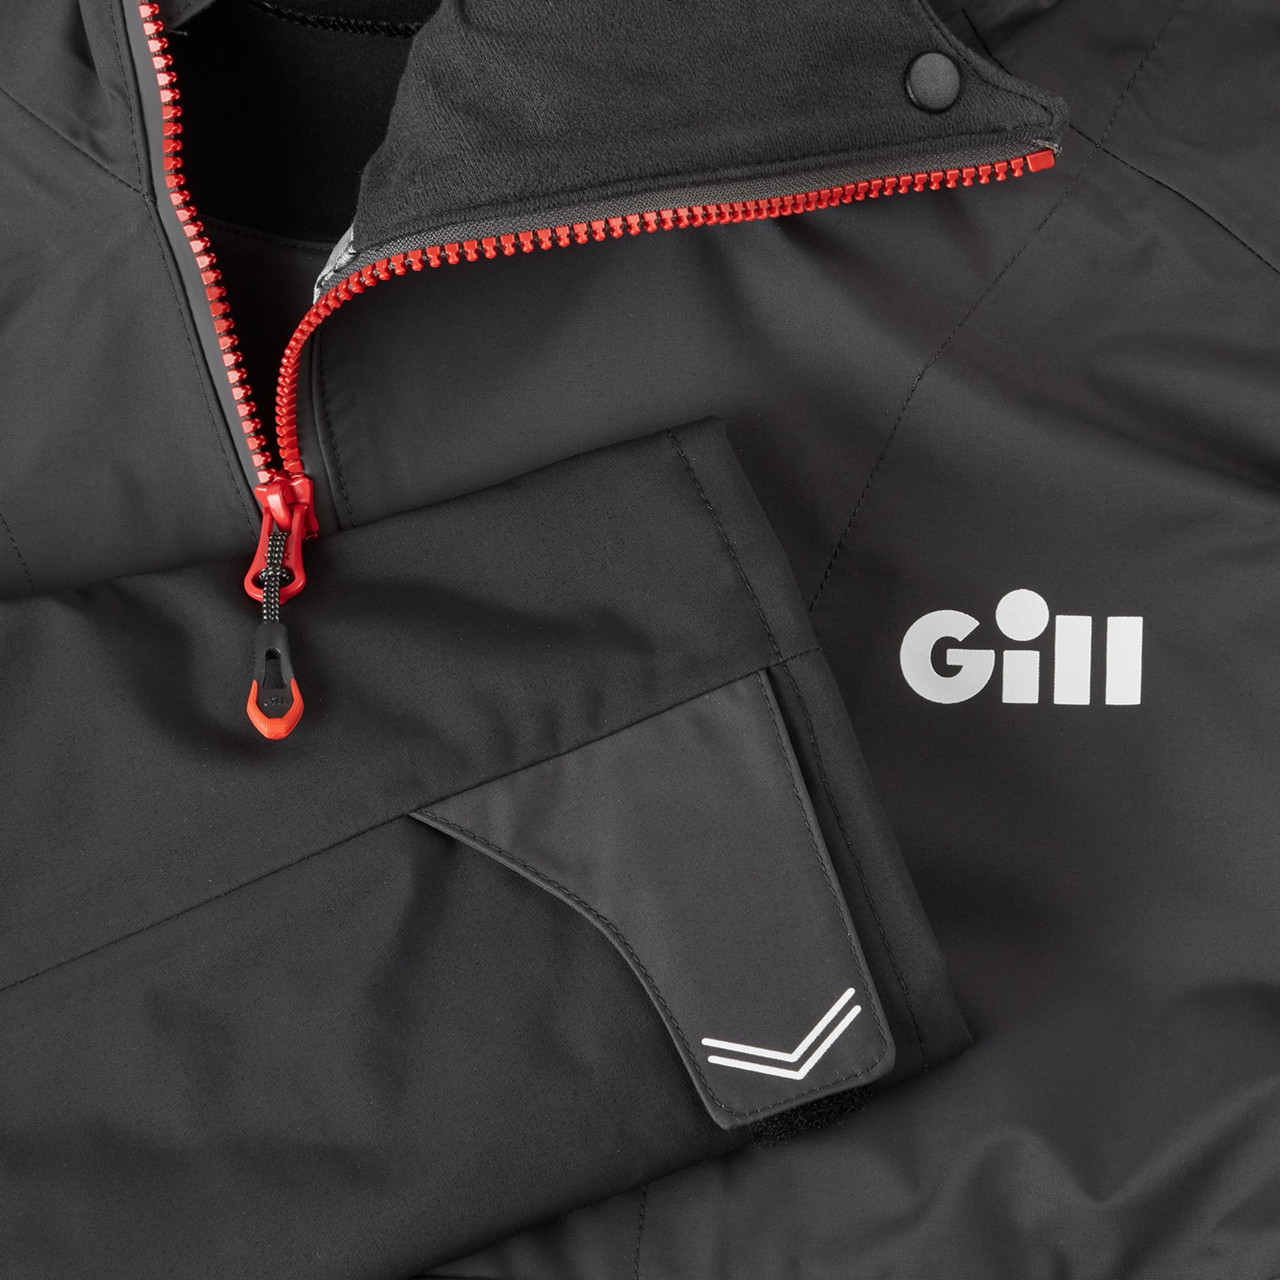 Verso Drysuit - Gill Marine Official US Store